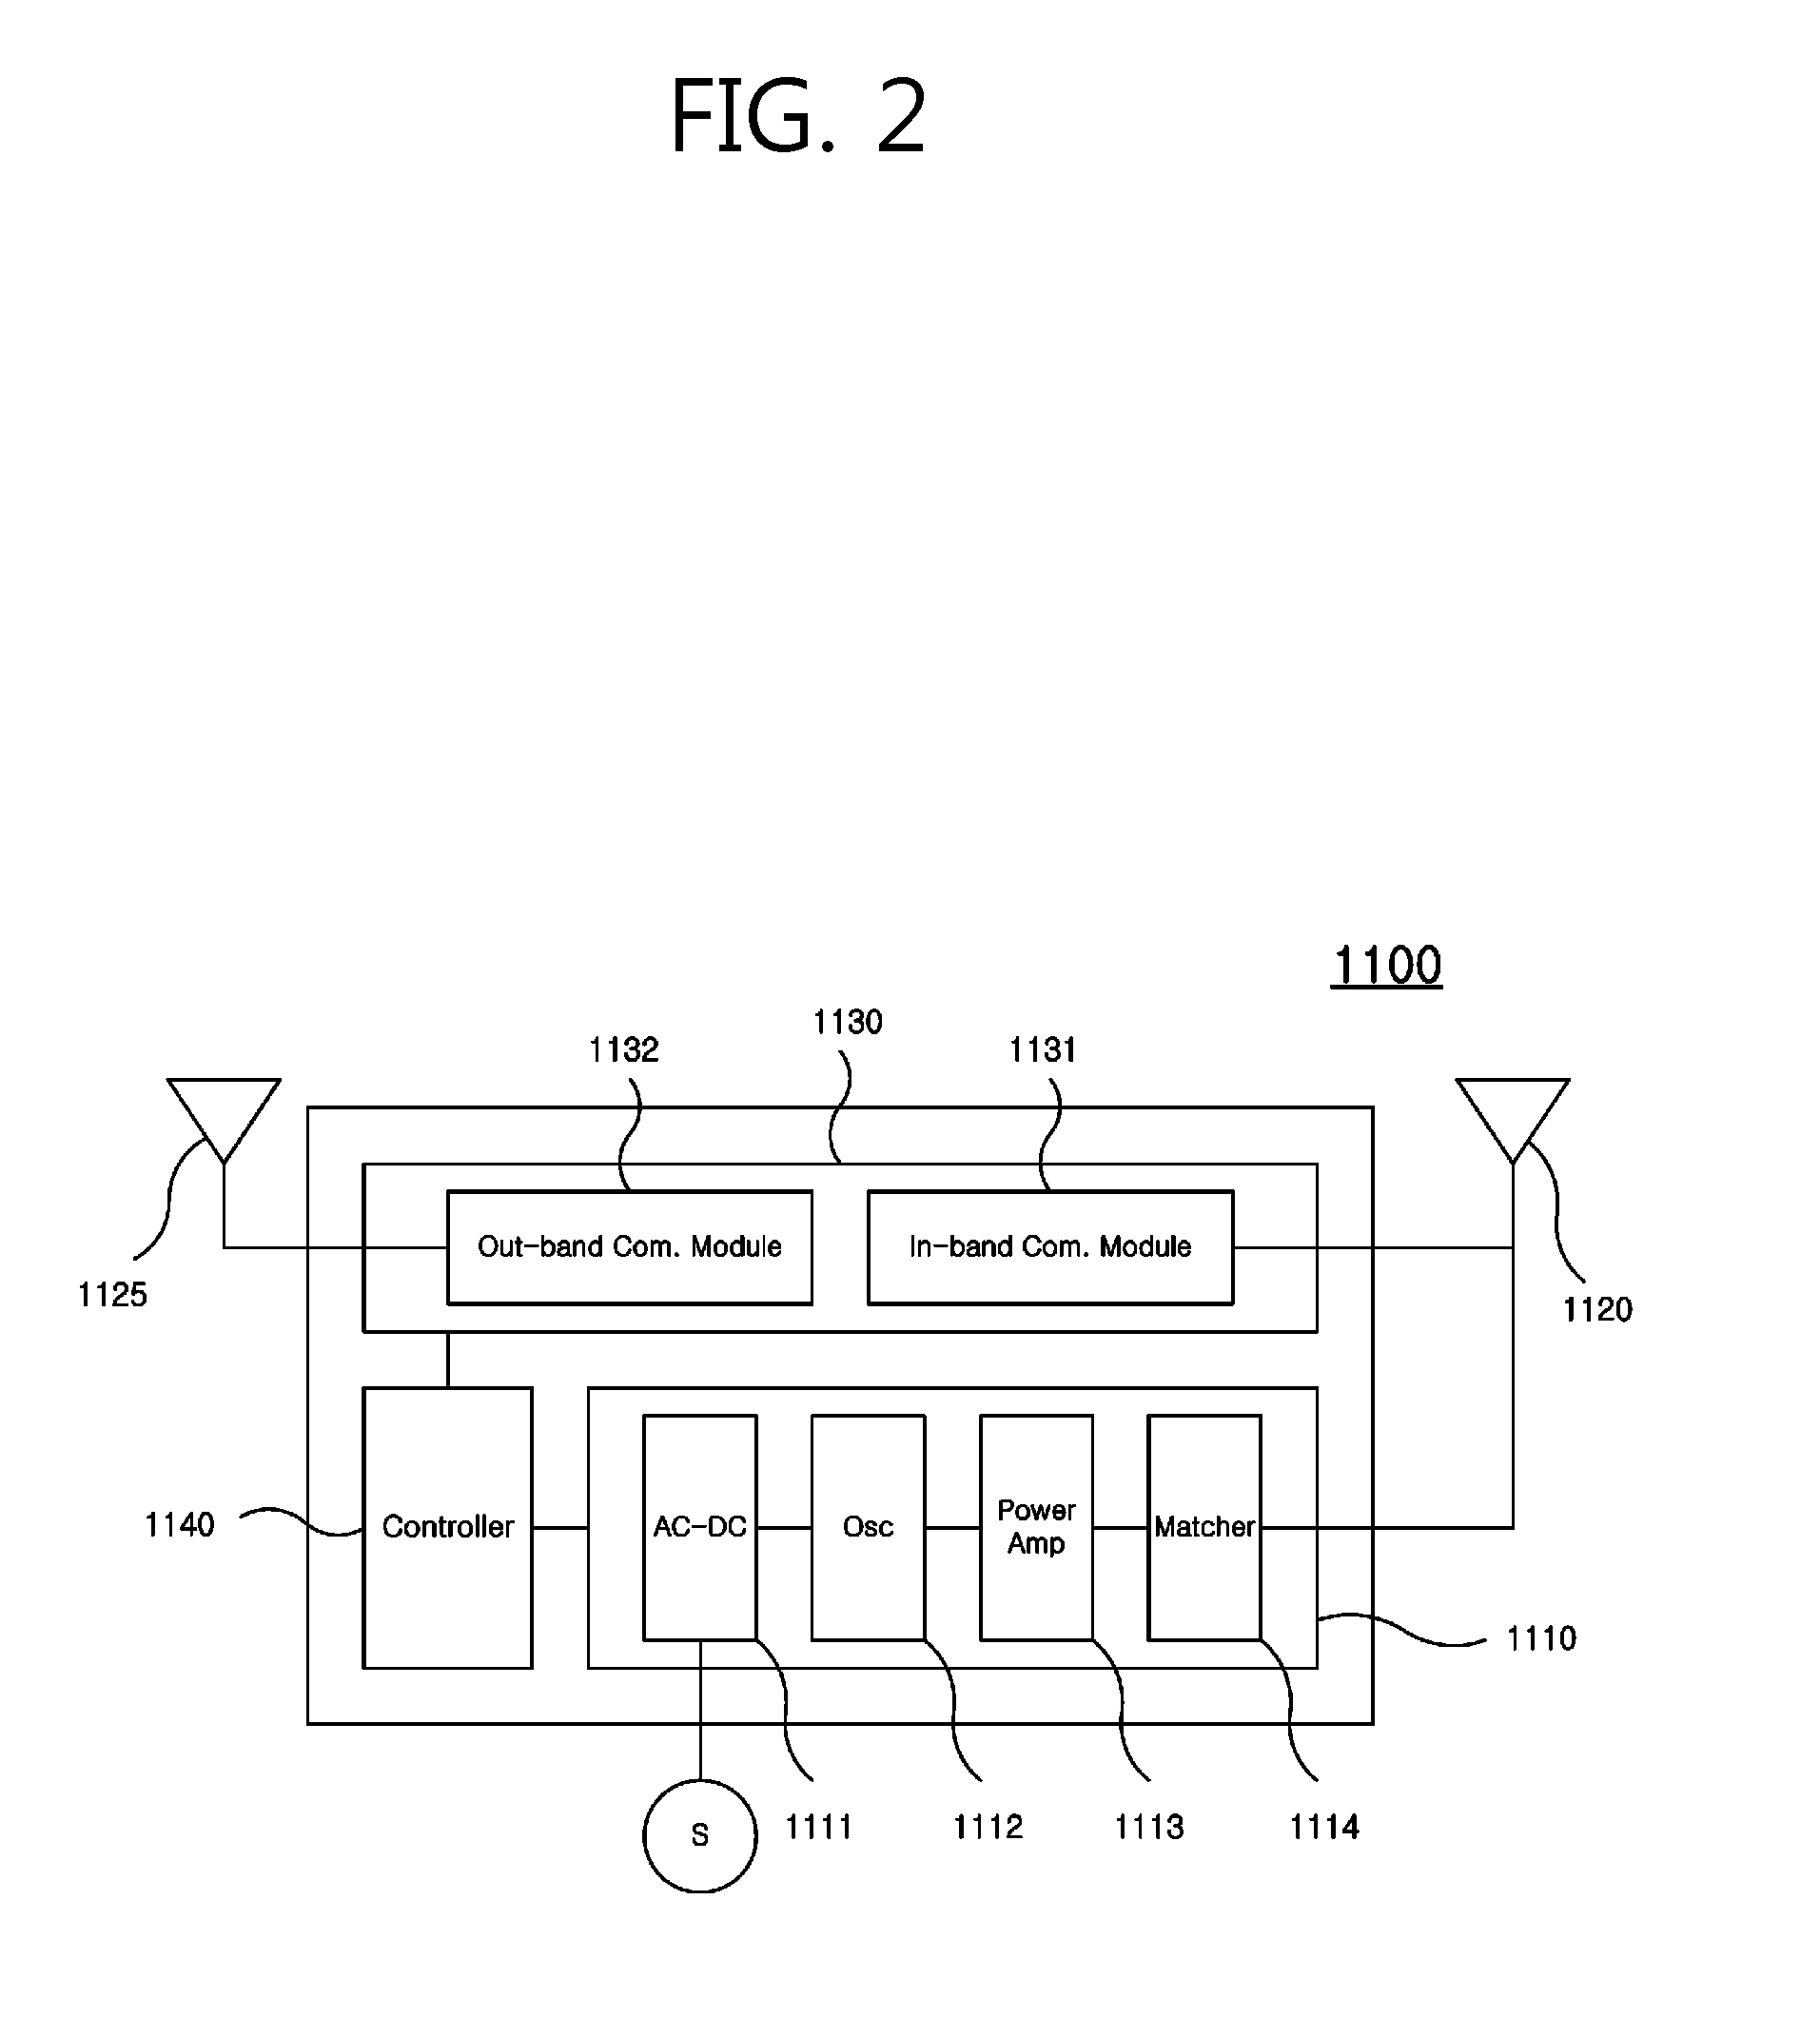 Wireless power transmission apparatus and method therefor